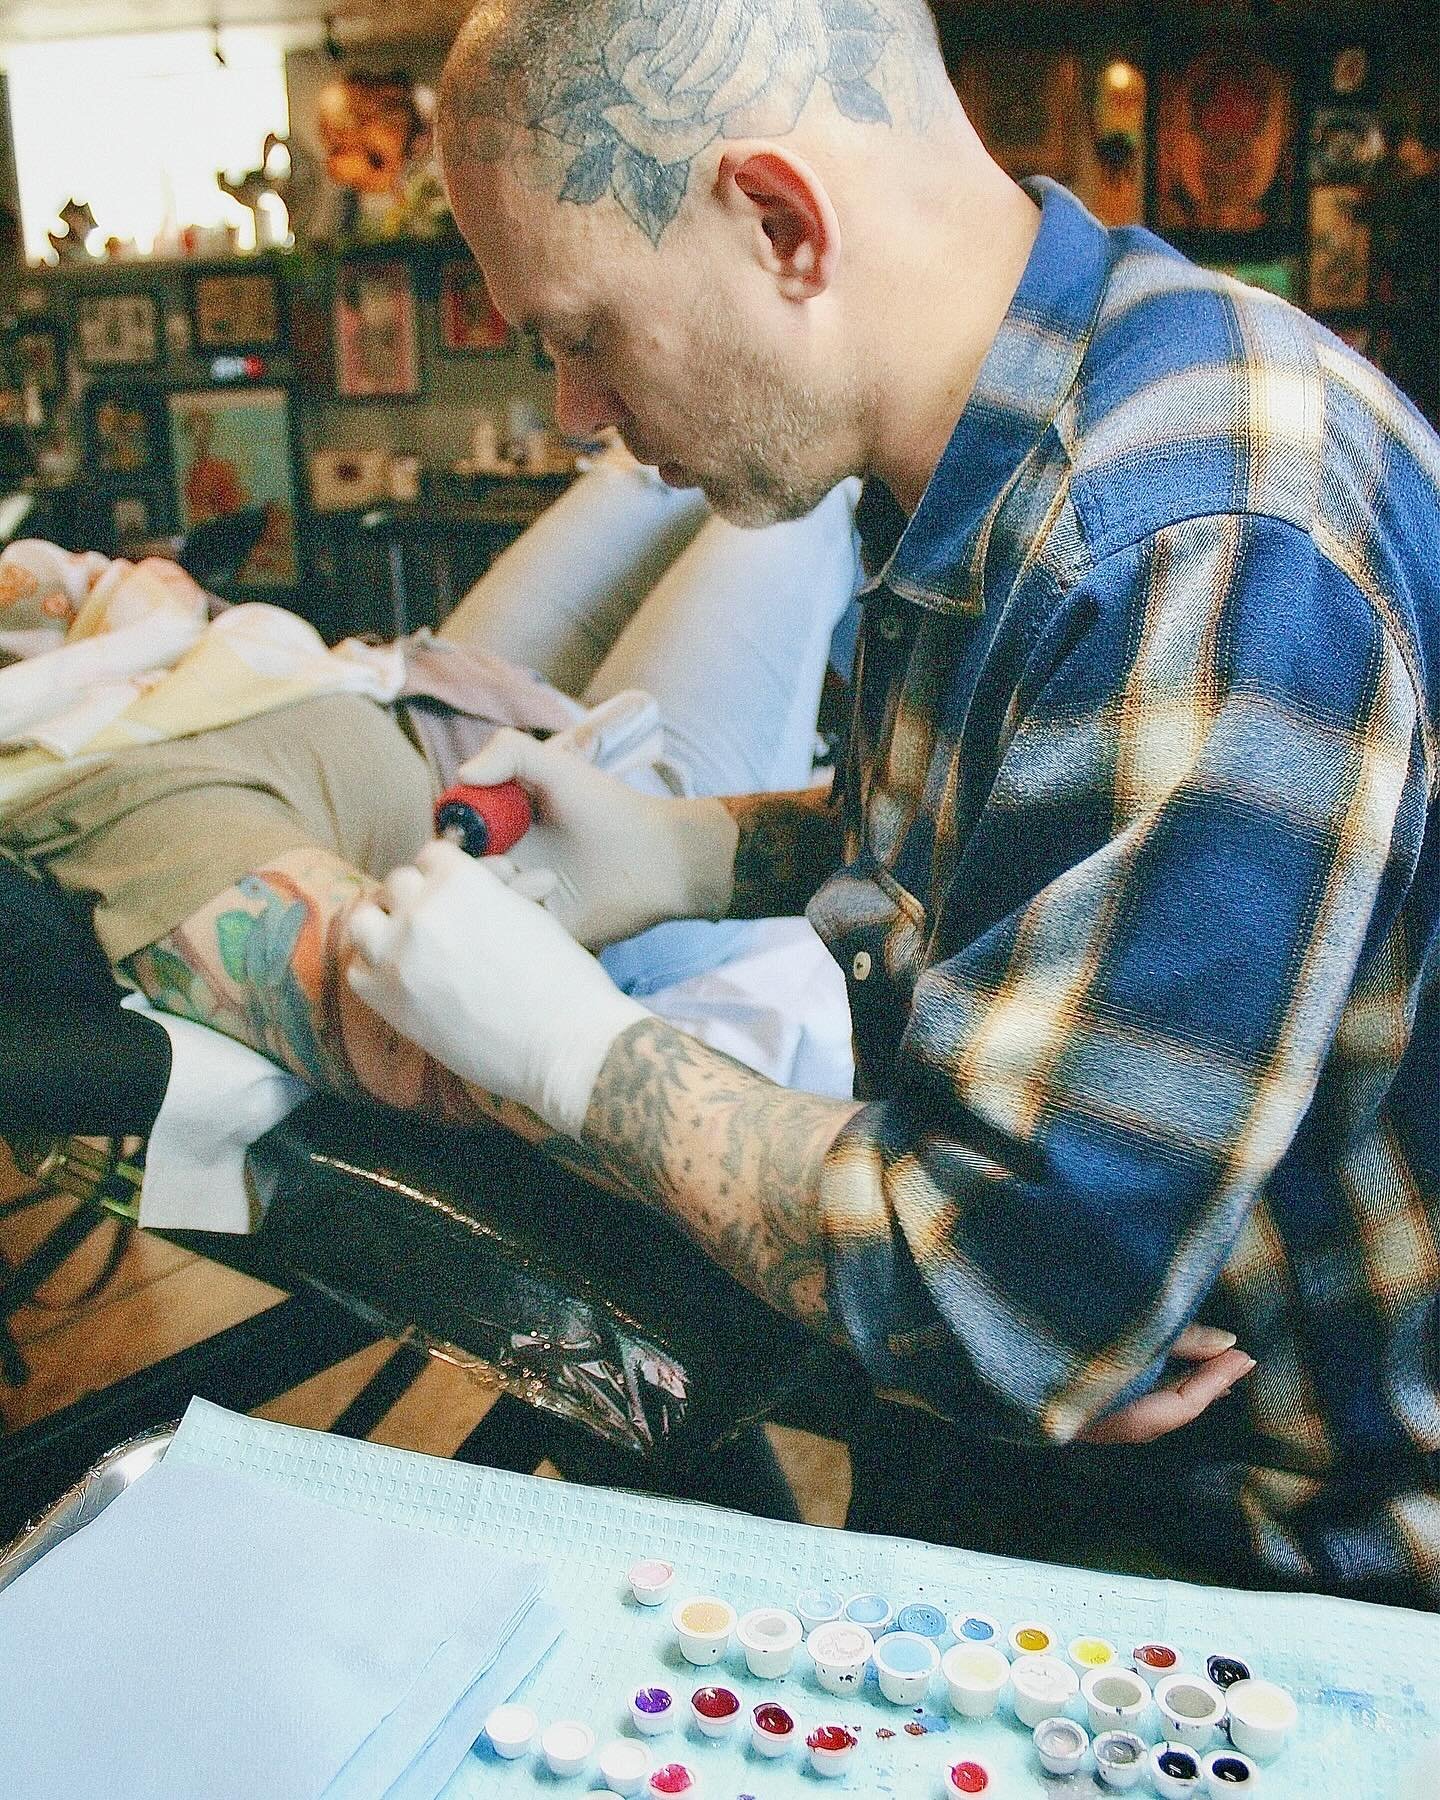 What&rsquo;s Dougie doing with all those colors?? Check out his page to see what he came up with 🕊️

We&rsquo;re taking walk-ins every day! Call us at 503.327.8885 to set something up!

#portlandoregon #portlandtattoo #portlandtattooartist #portland